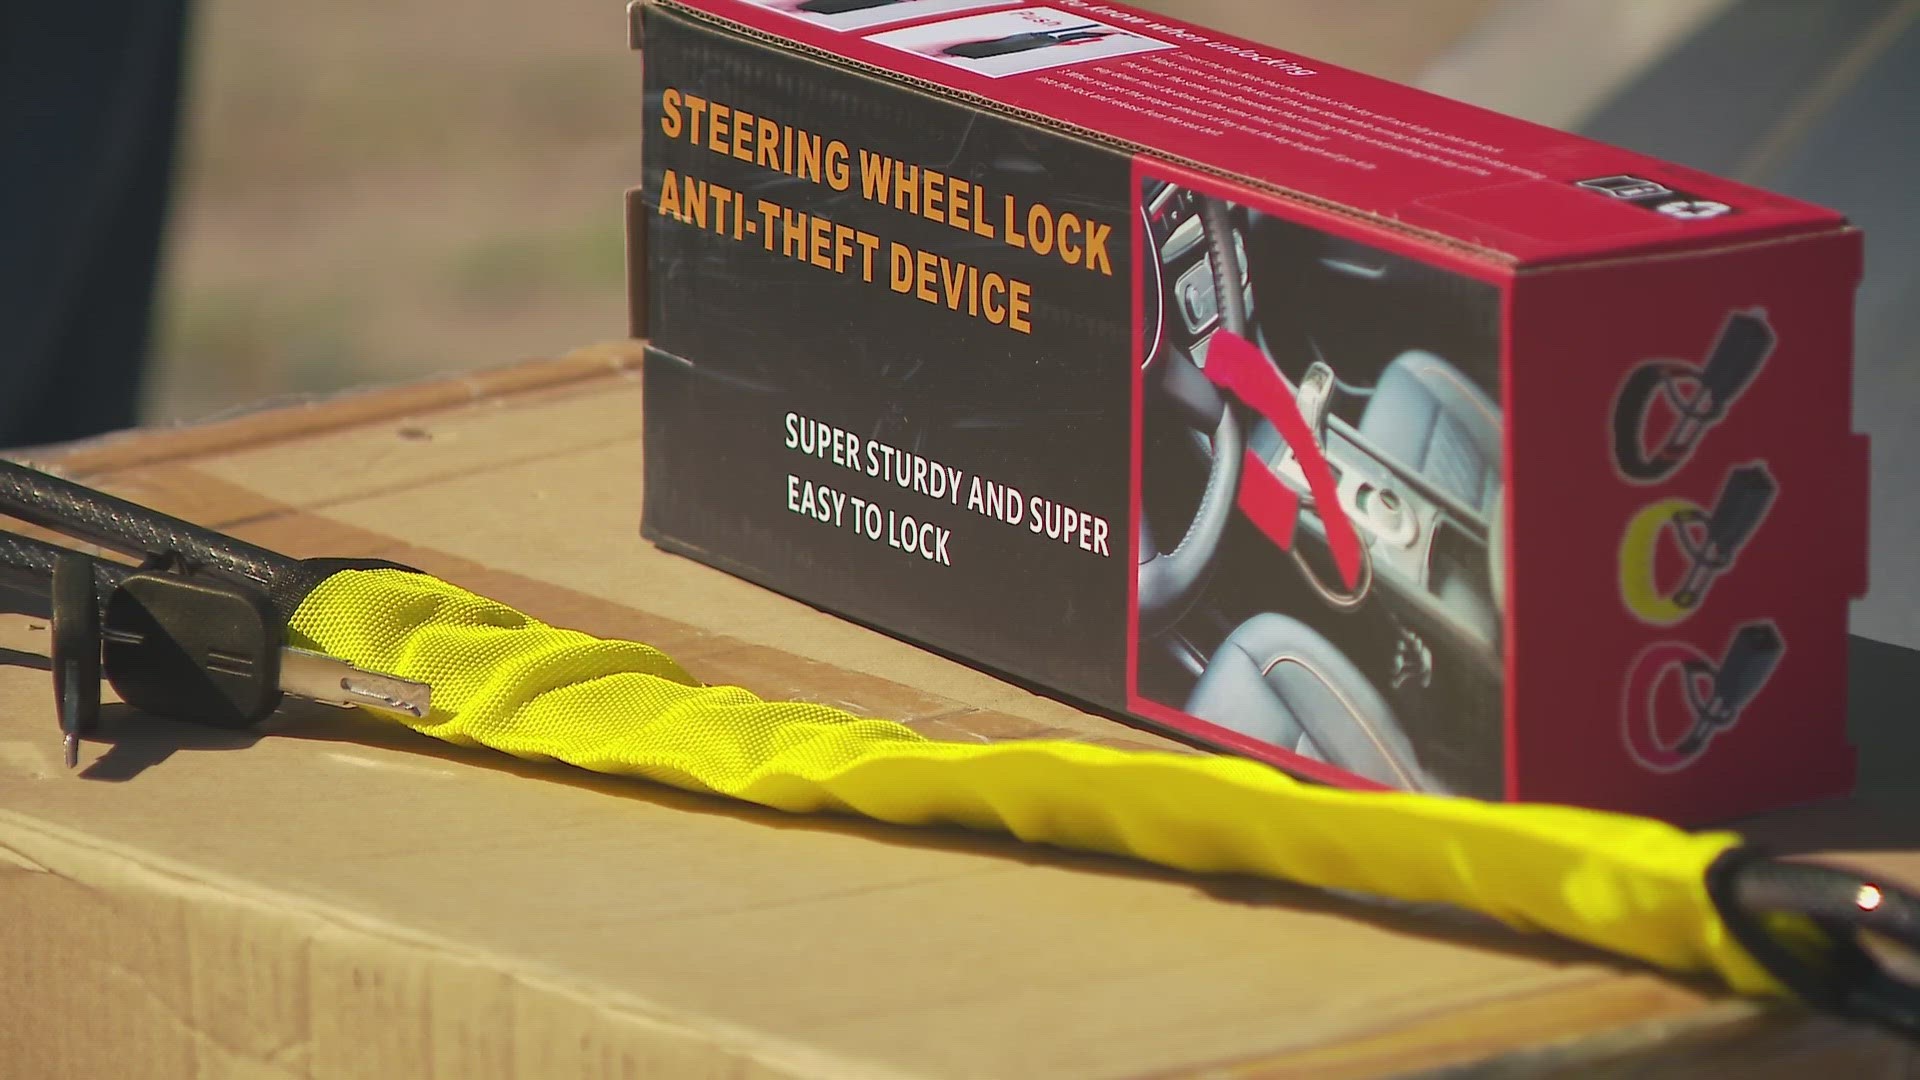 Shirley's Way donated money to LMPD for the department to buy more than a thousand steering wheel locks for public distribution in each of its eight divisions.